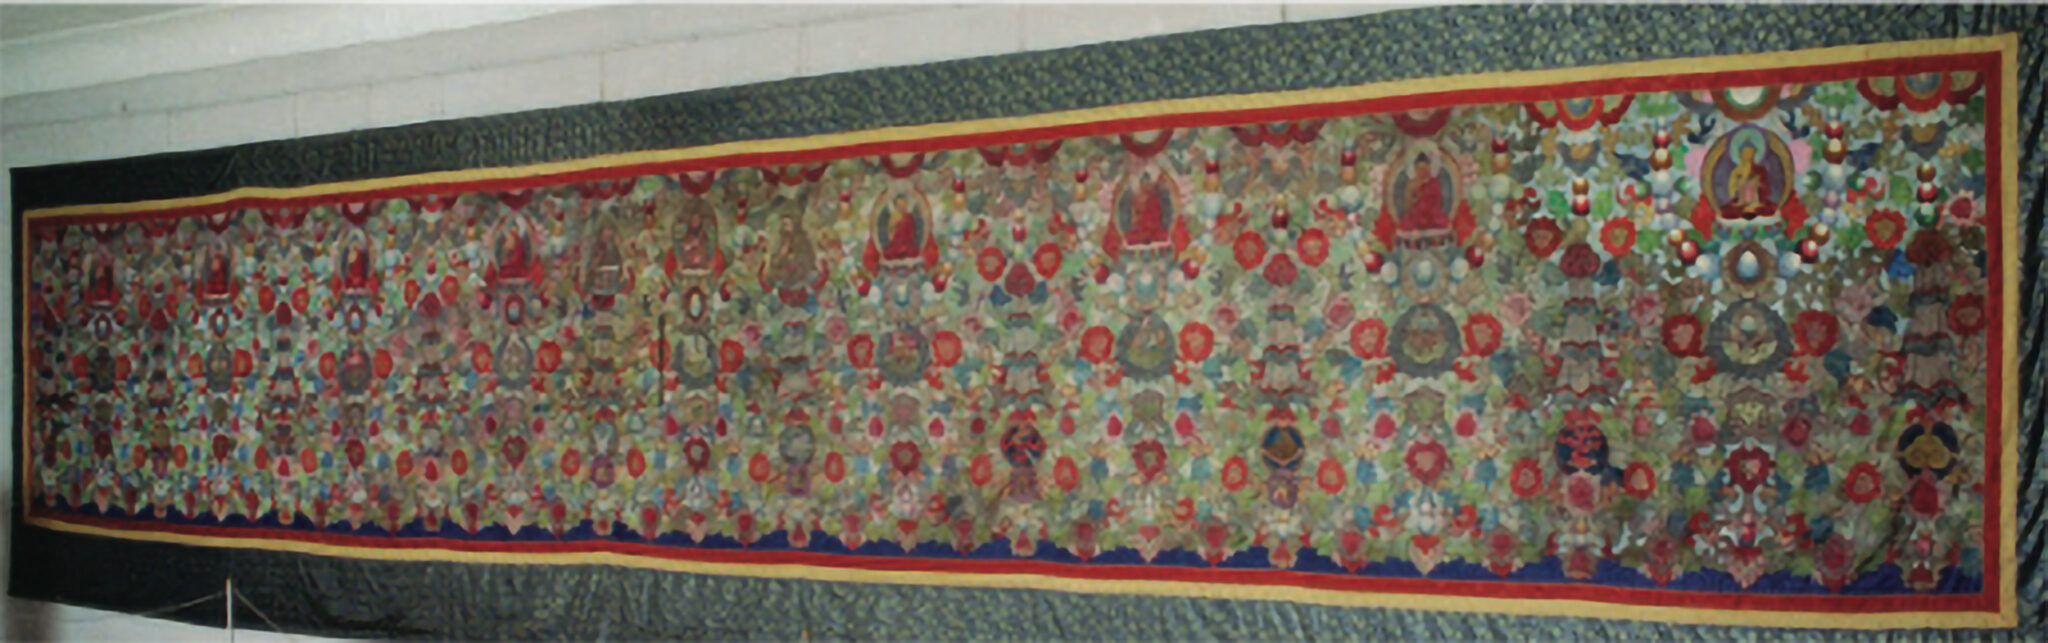 Long, wide embroidered textile in greens and reds mounted on green and gold brocade border